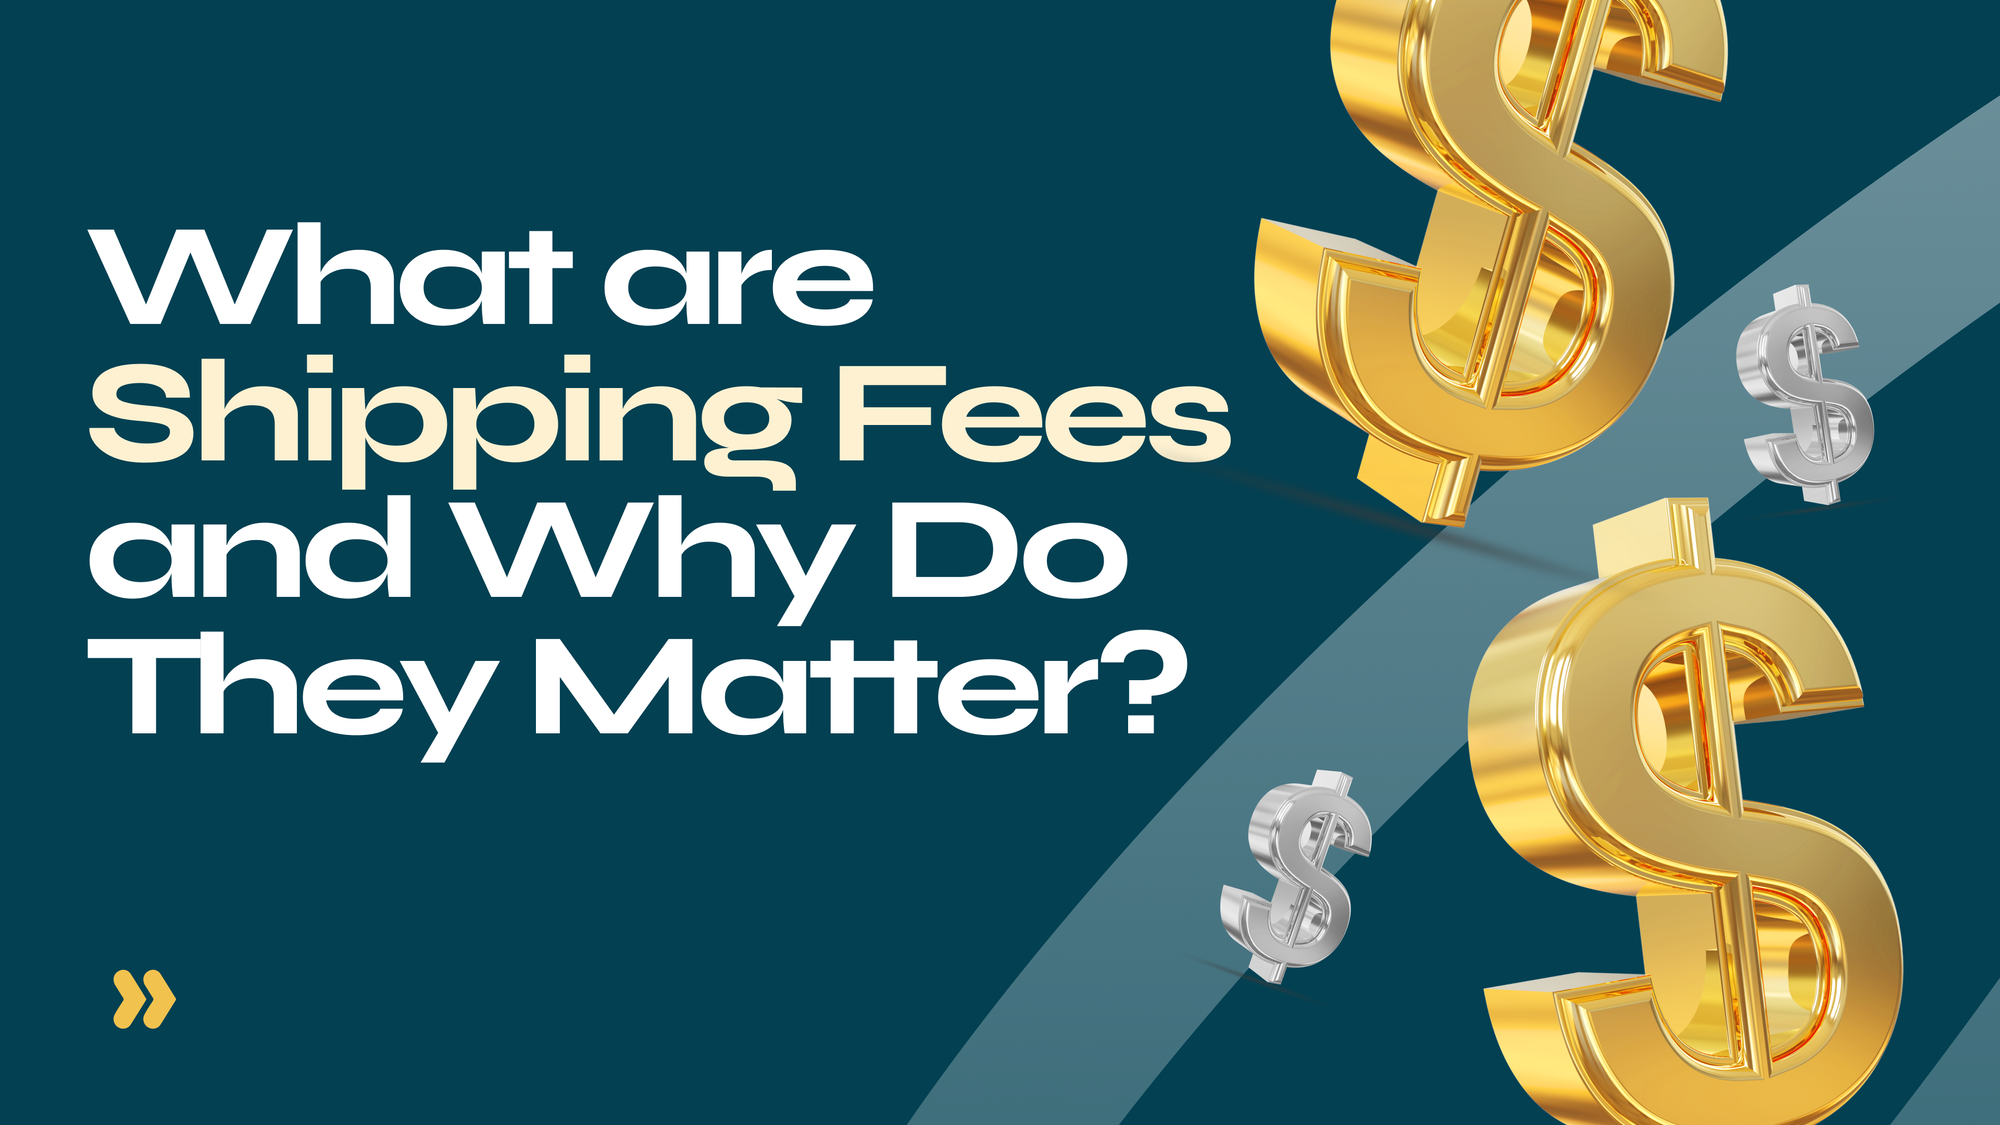 What are Shipping Fees, and Why Do They Matter?